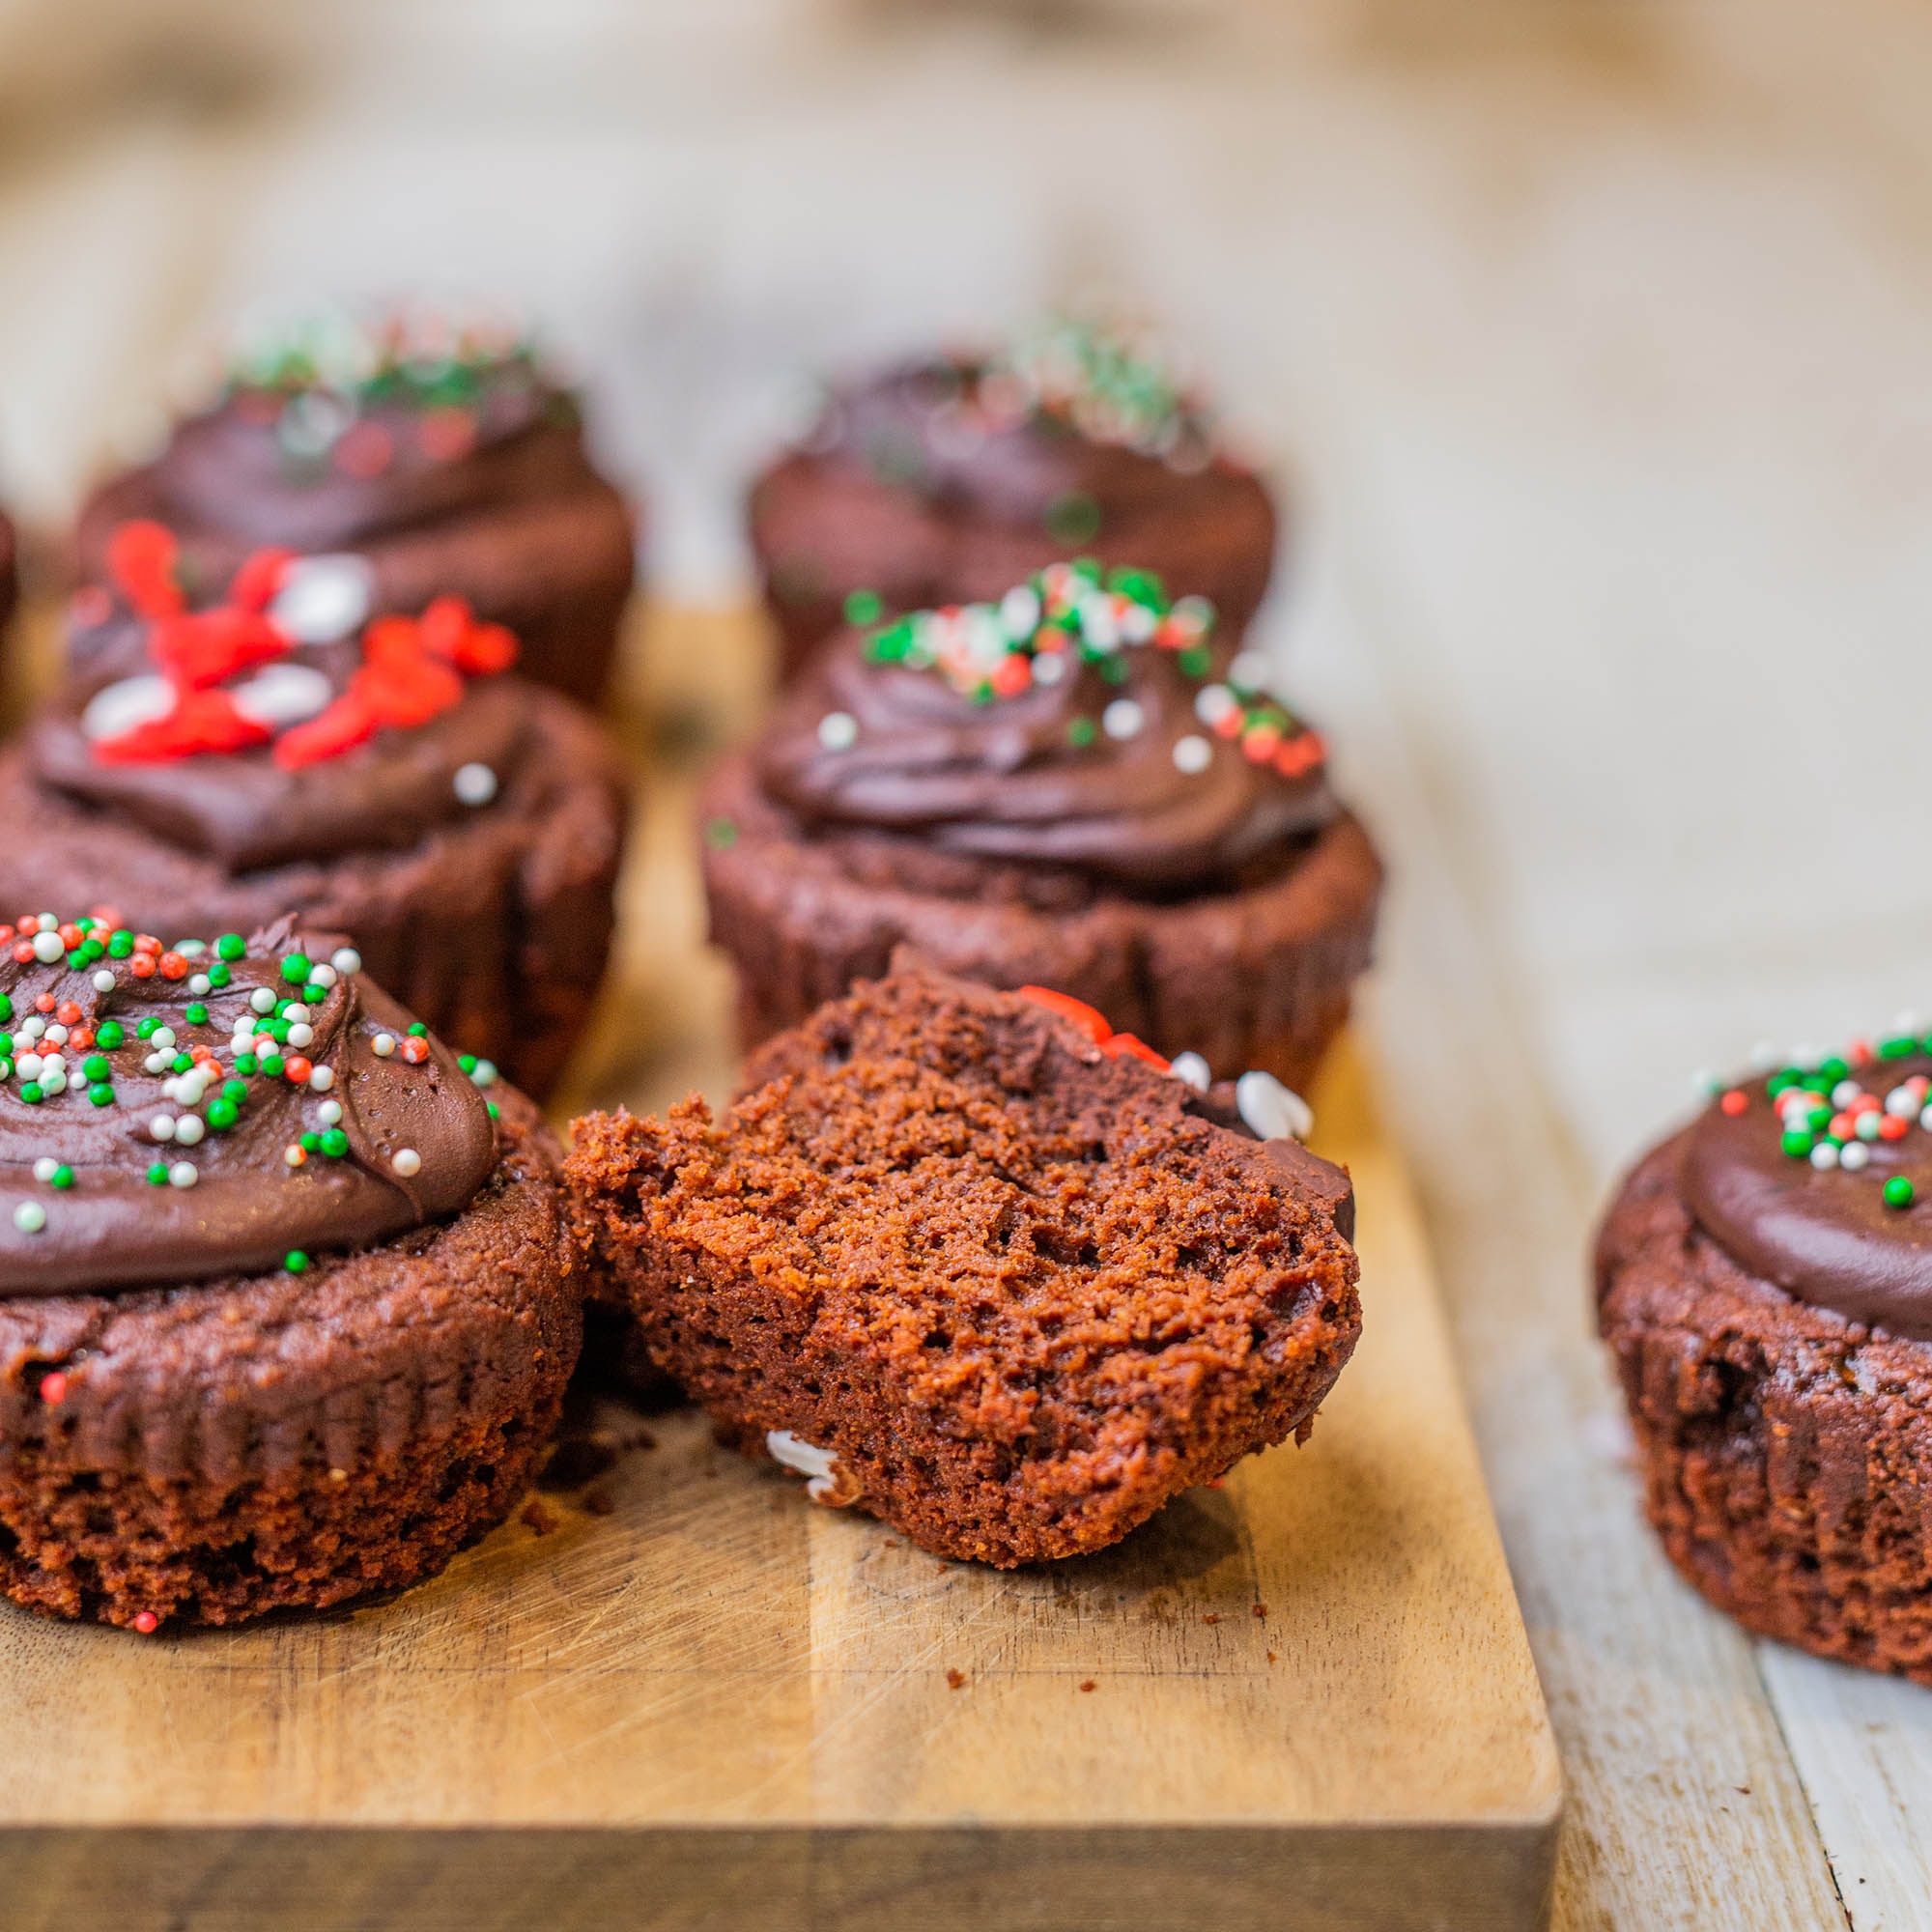 Vegan Chocolate Mint Cupcakes with Chocolate Peppermint Frosting